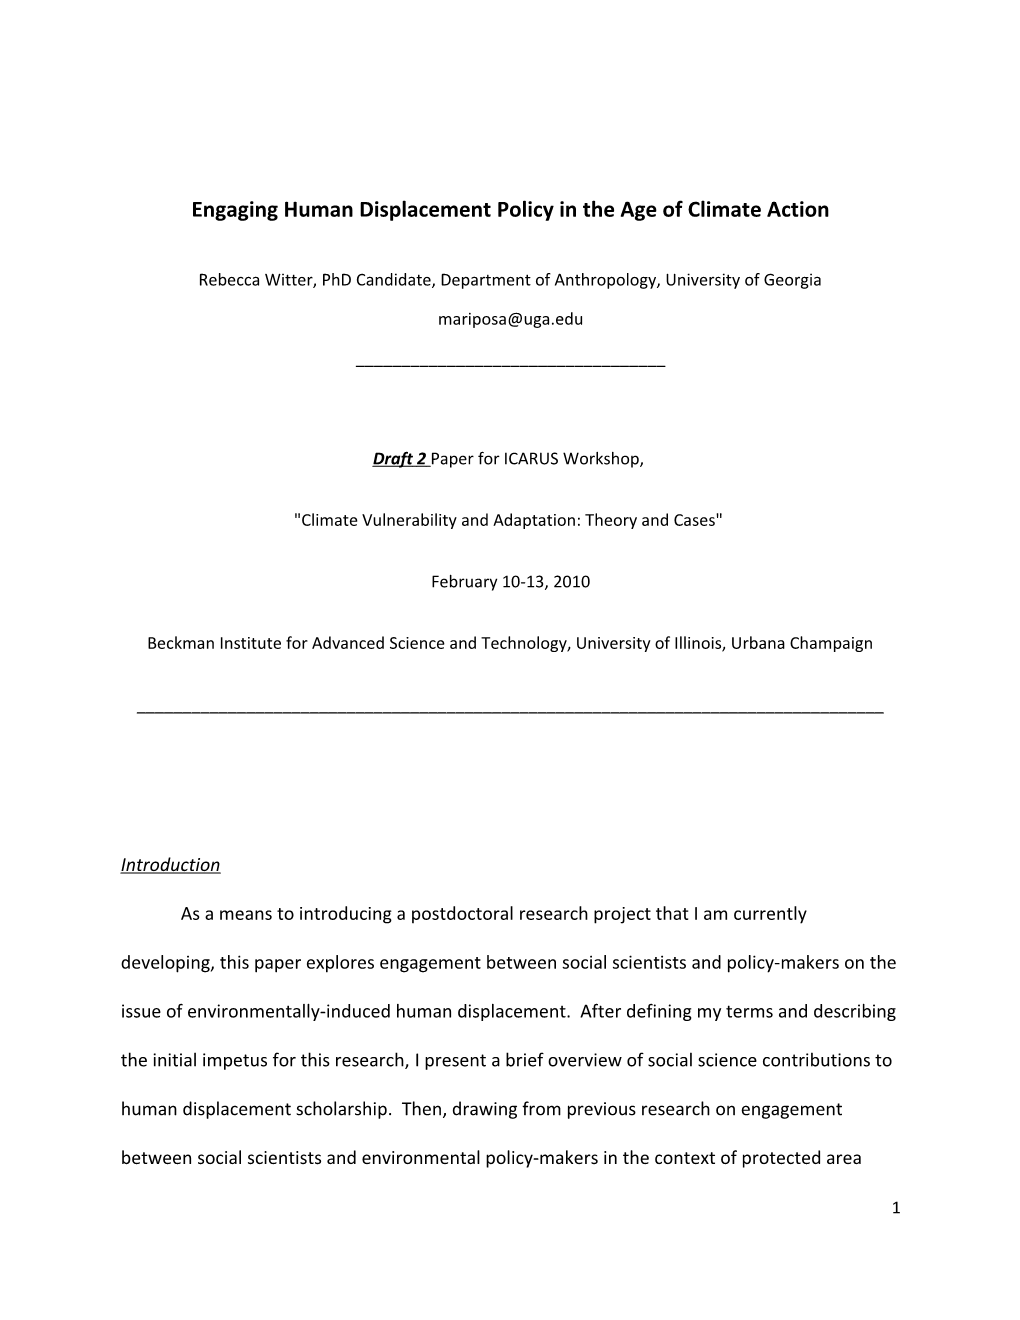 Engaging Human Displacement Policy in the Age of Climate Action